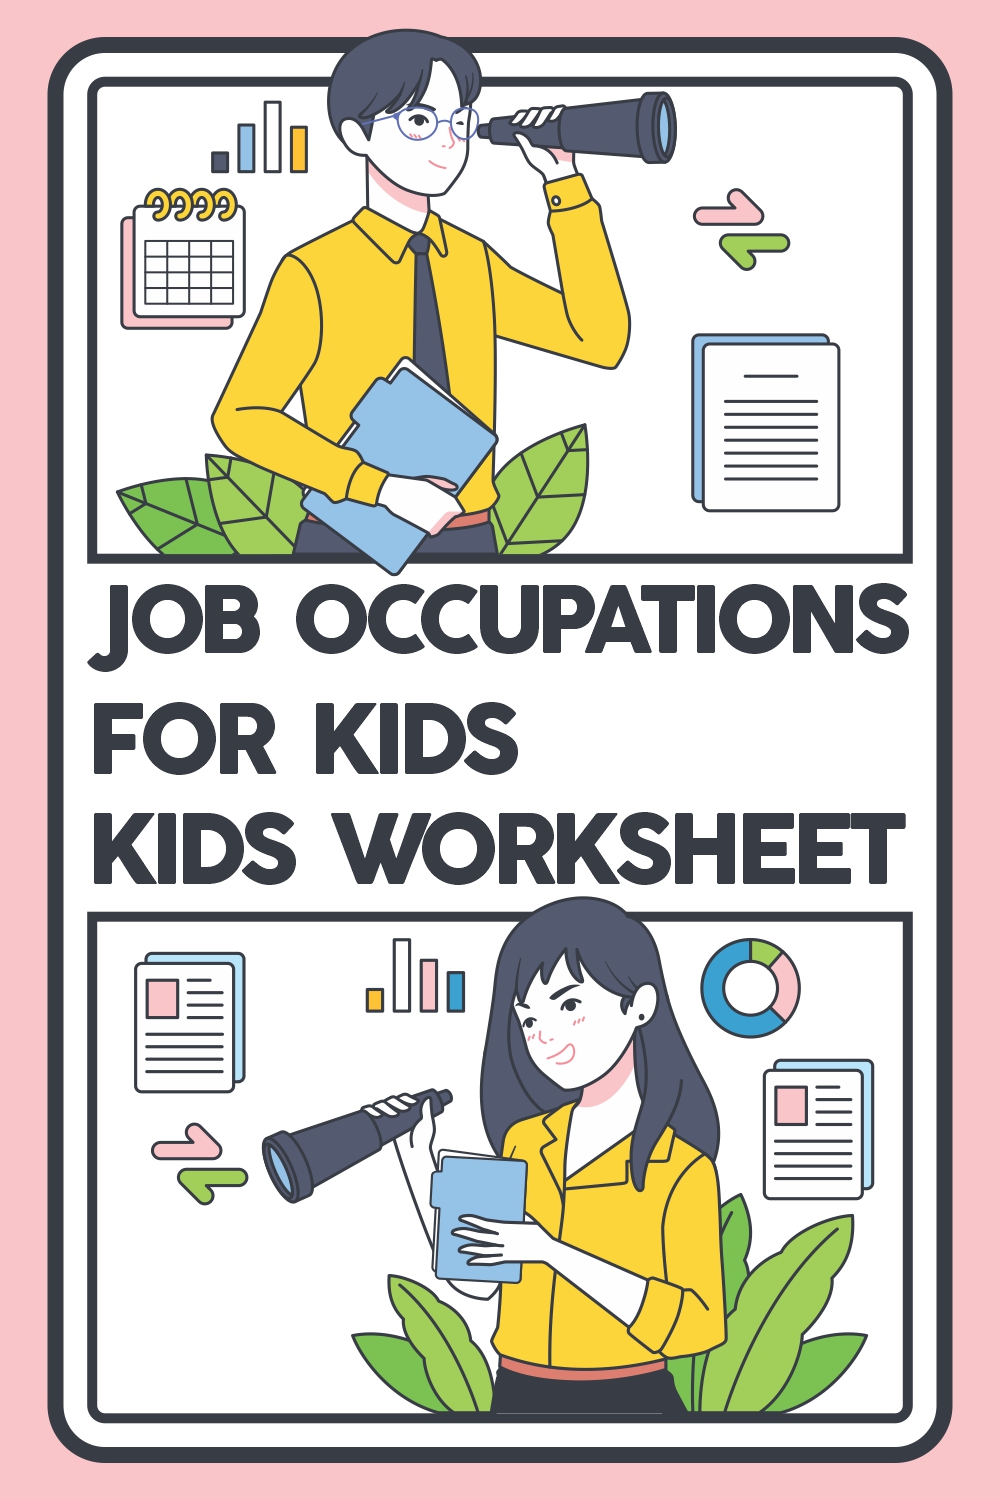 14 Images of Jobs Occupations For Kids Worksheets